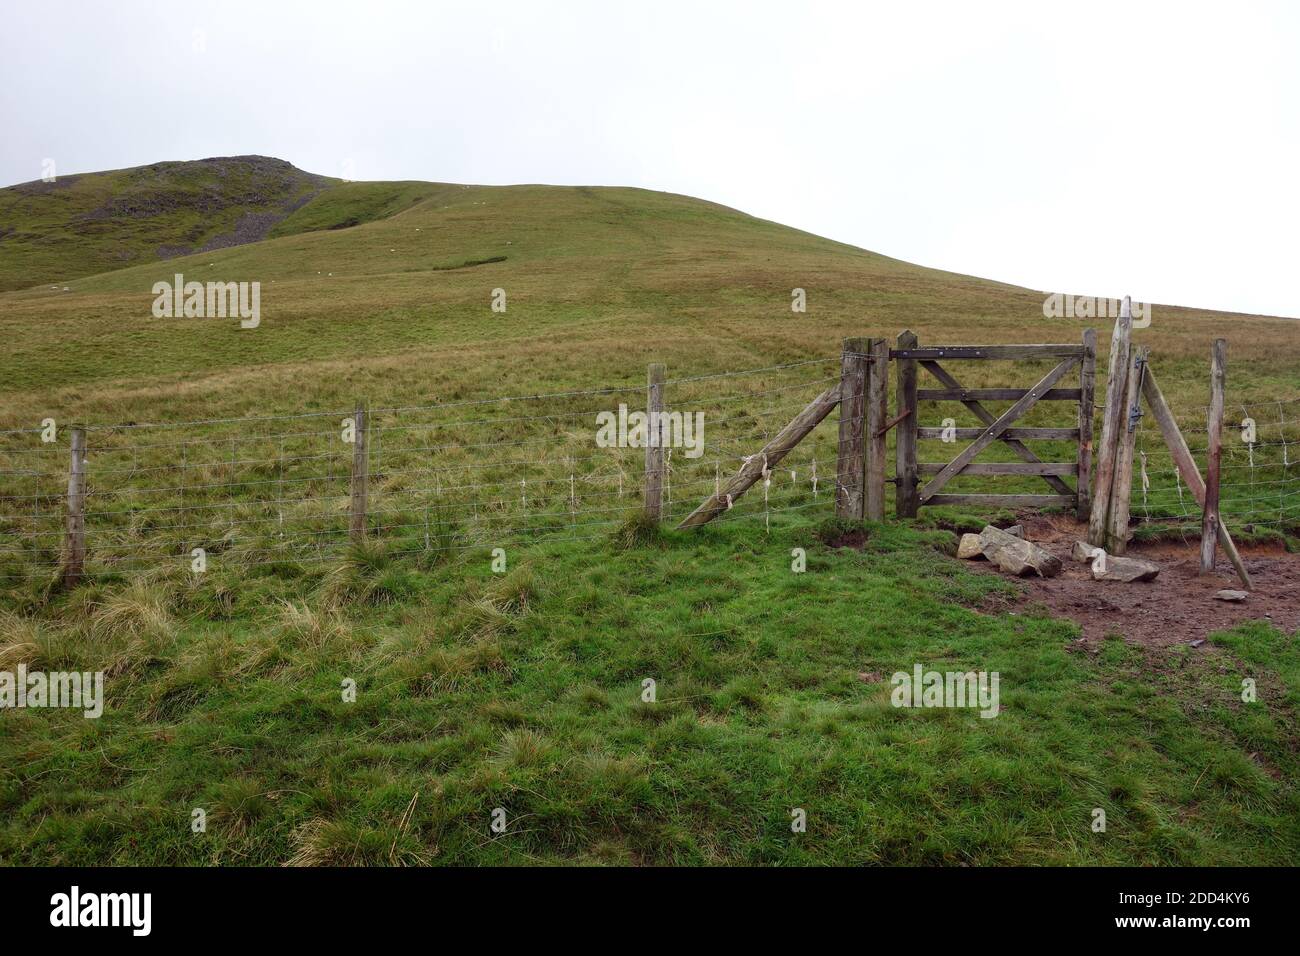 Wooden Gate to the Wainwright 'Clough Head' from the Old Coach Road to Dockray in Matterdale from St John's in the Vale, Lake District National Park. Stock Photo